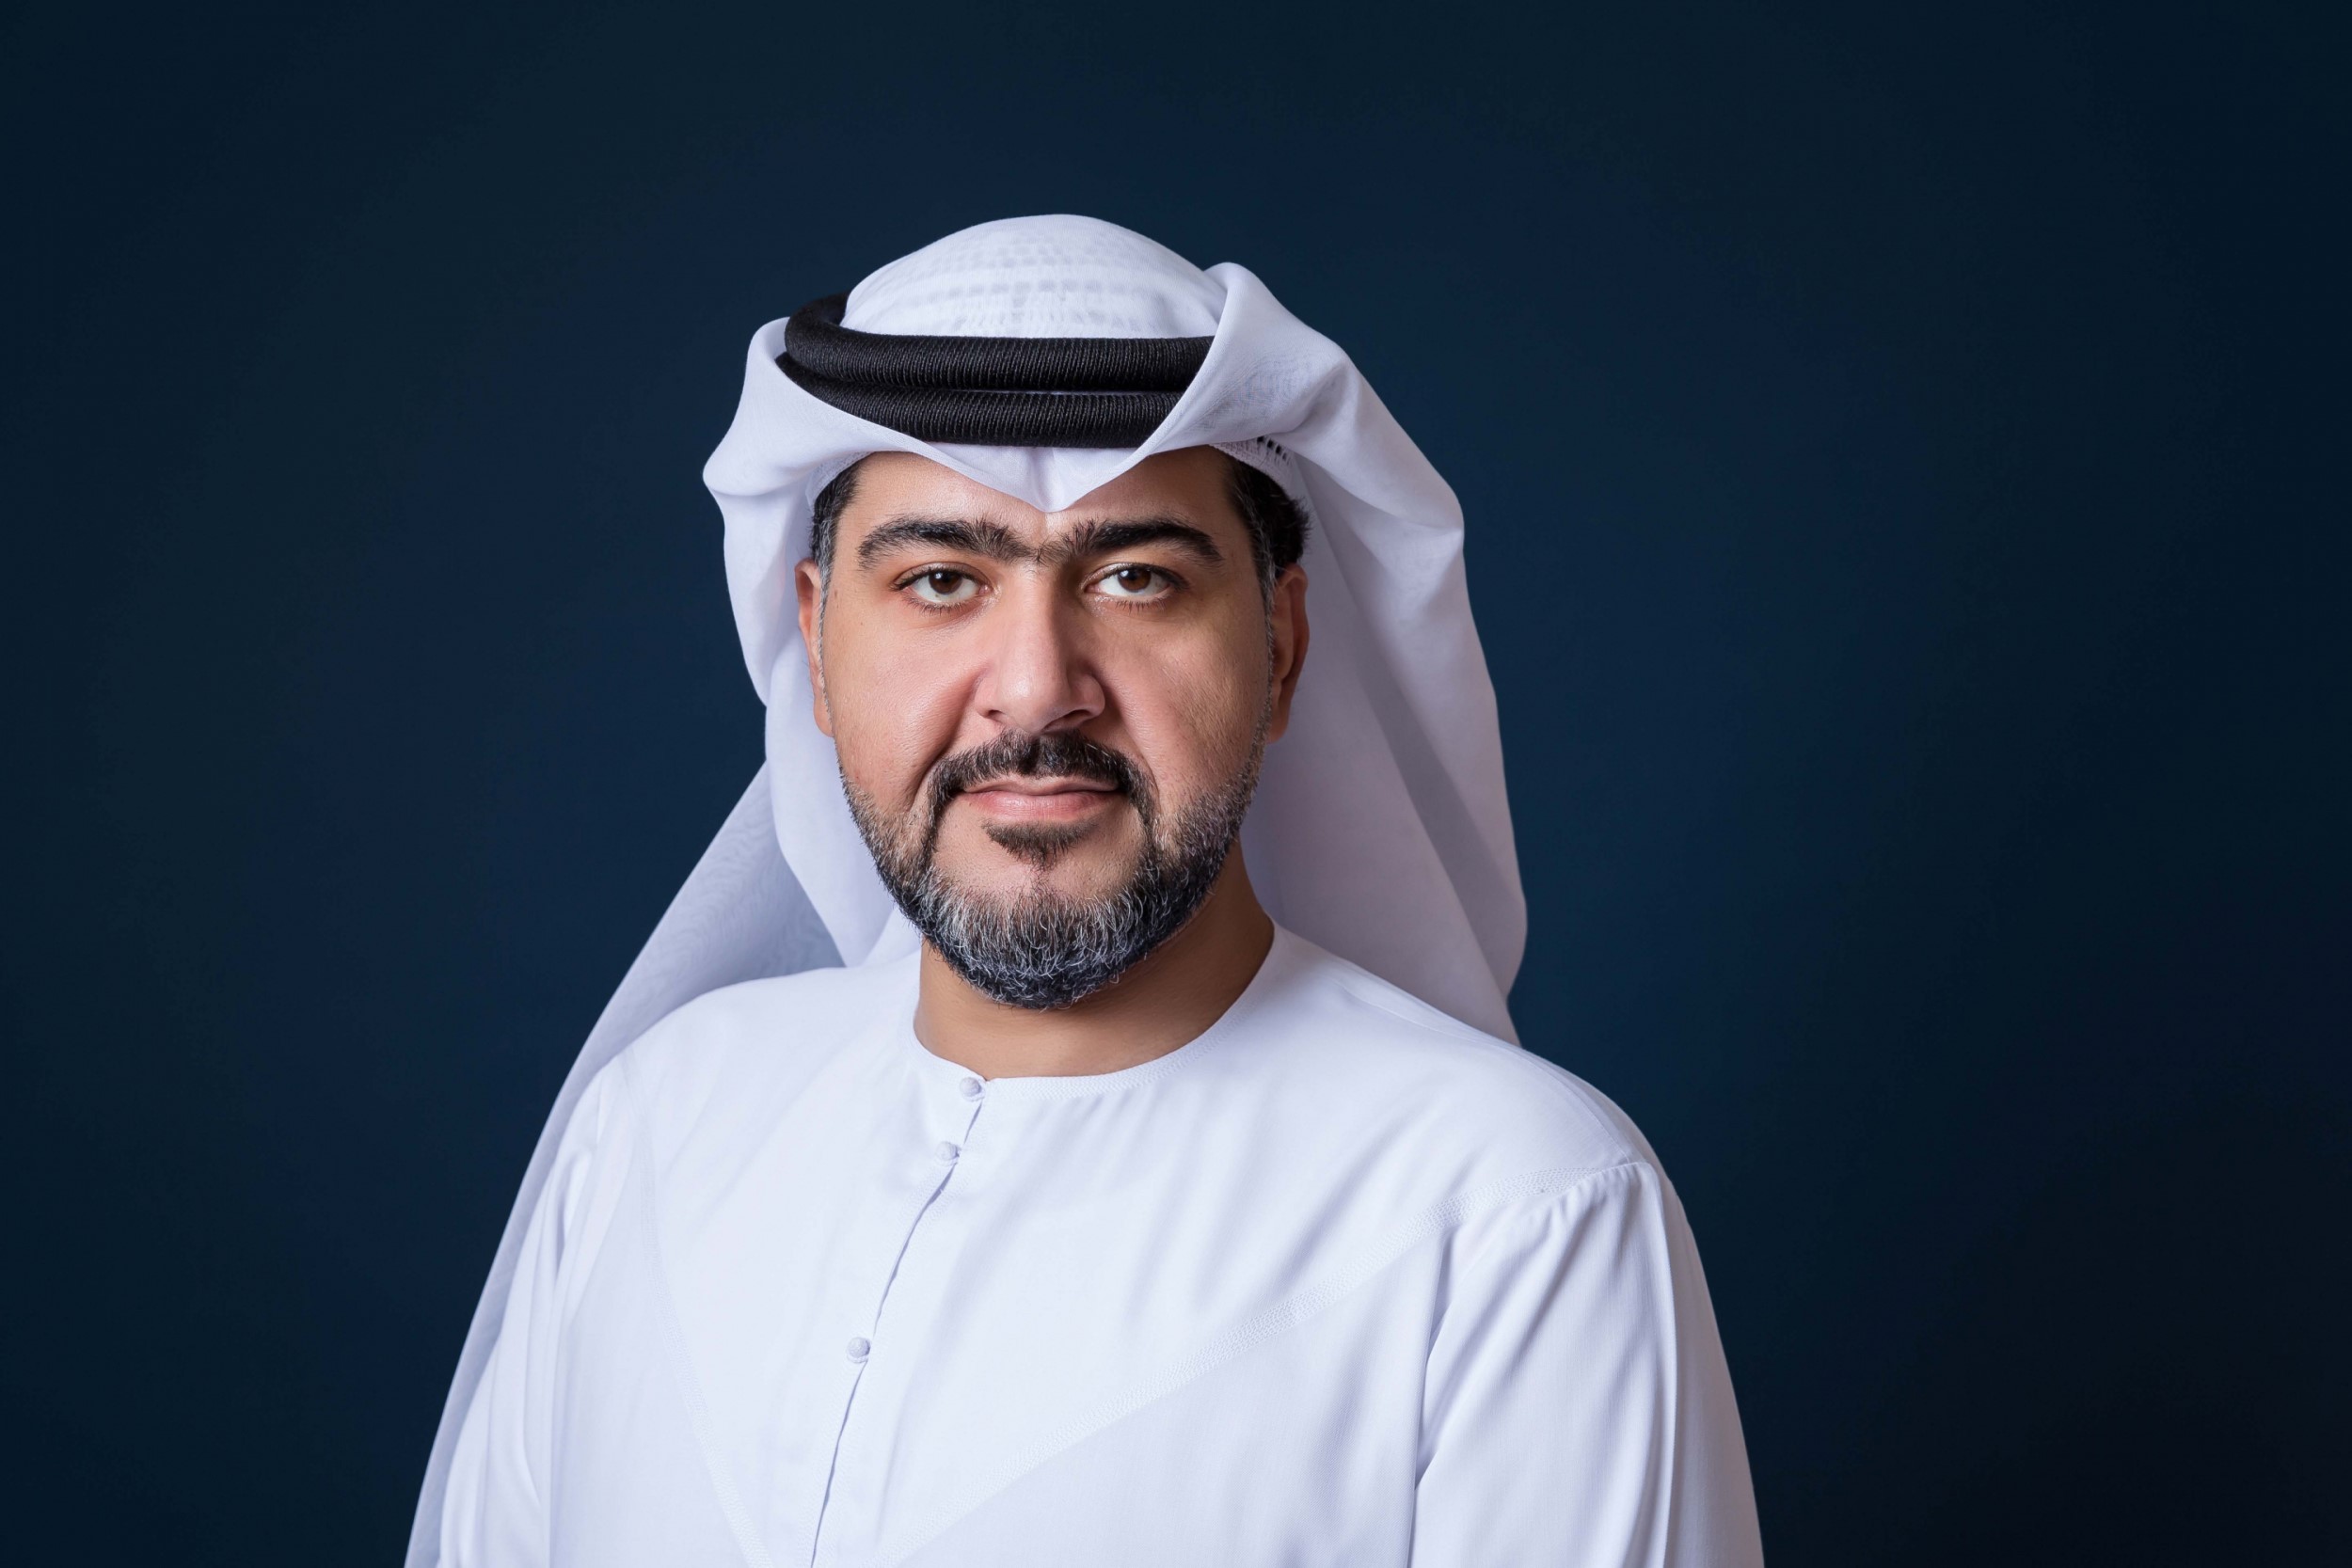 sandooq-al-watan-expands-scope-of-rethink-brine-challenge-to-include-innovative-medical-solutions-to-covid19